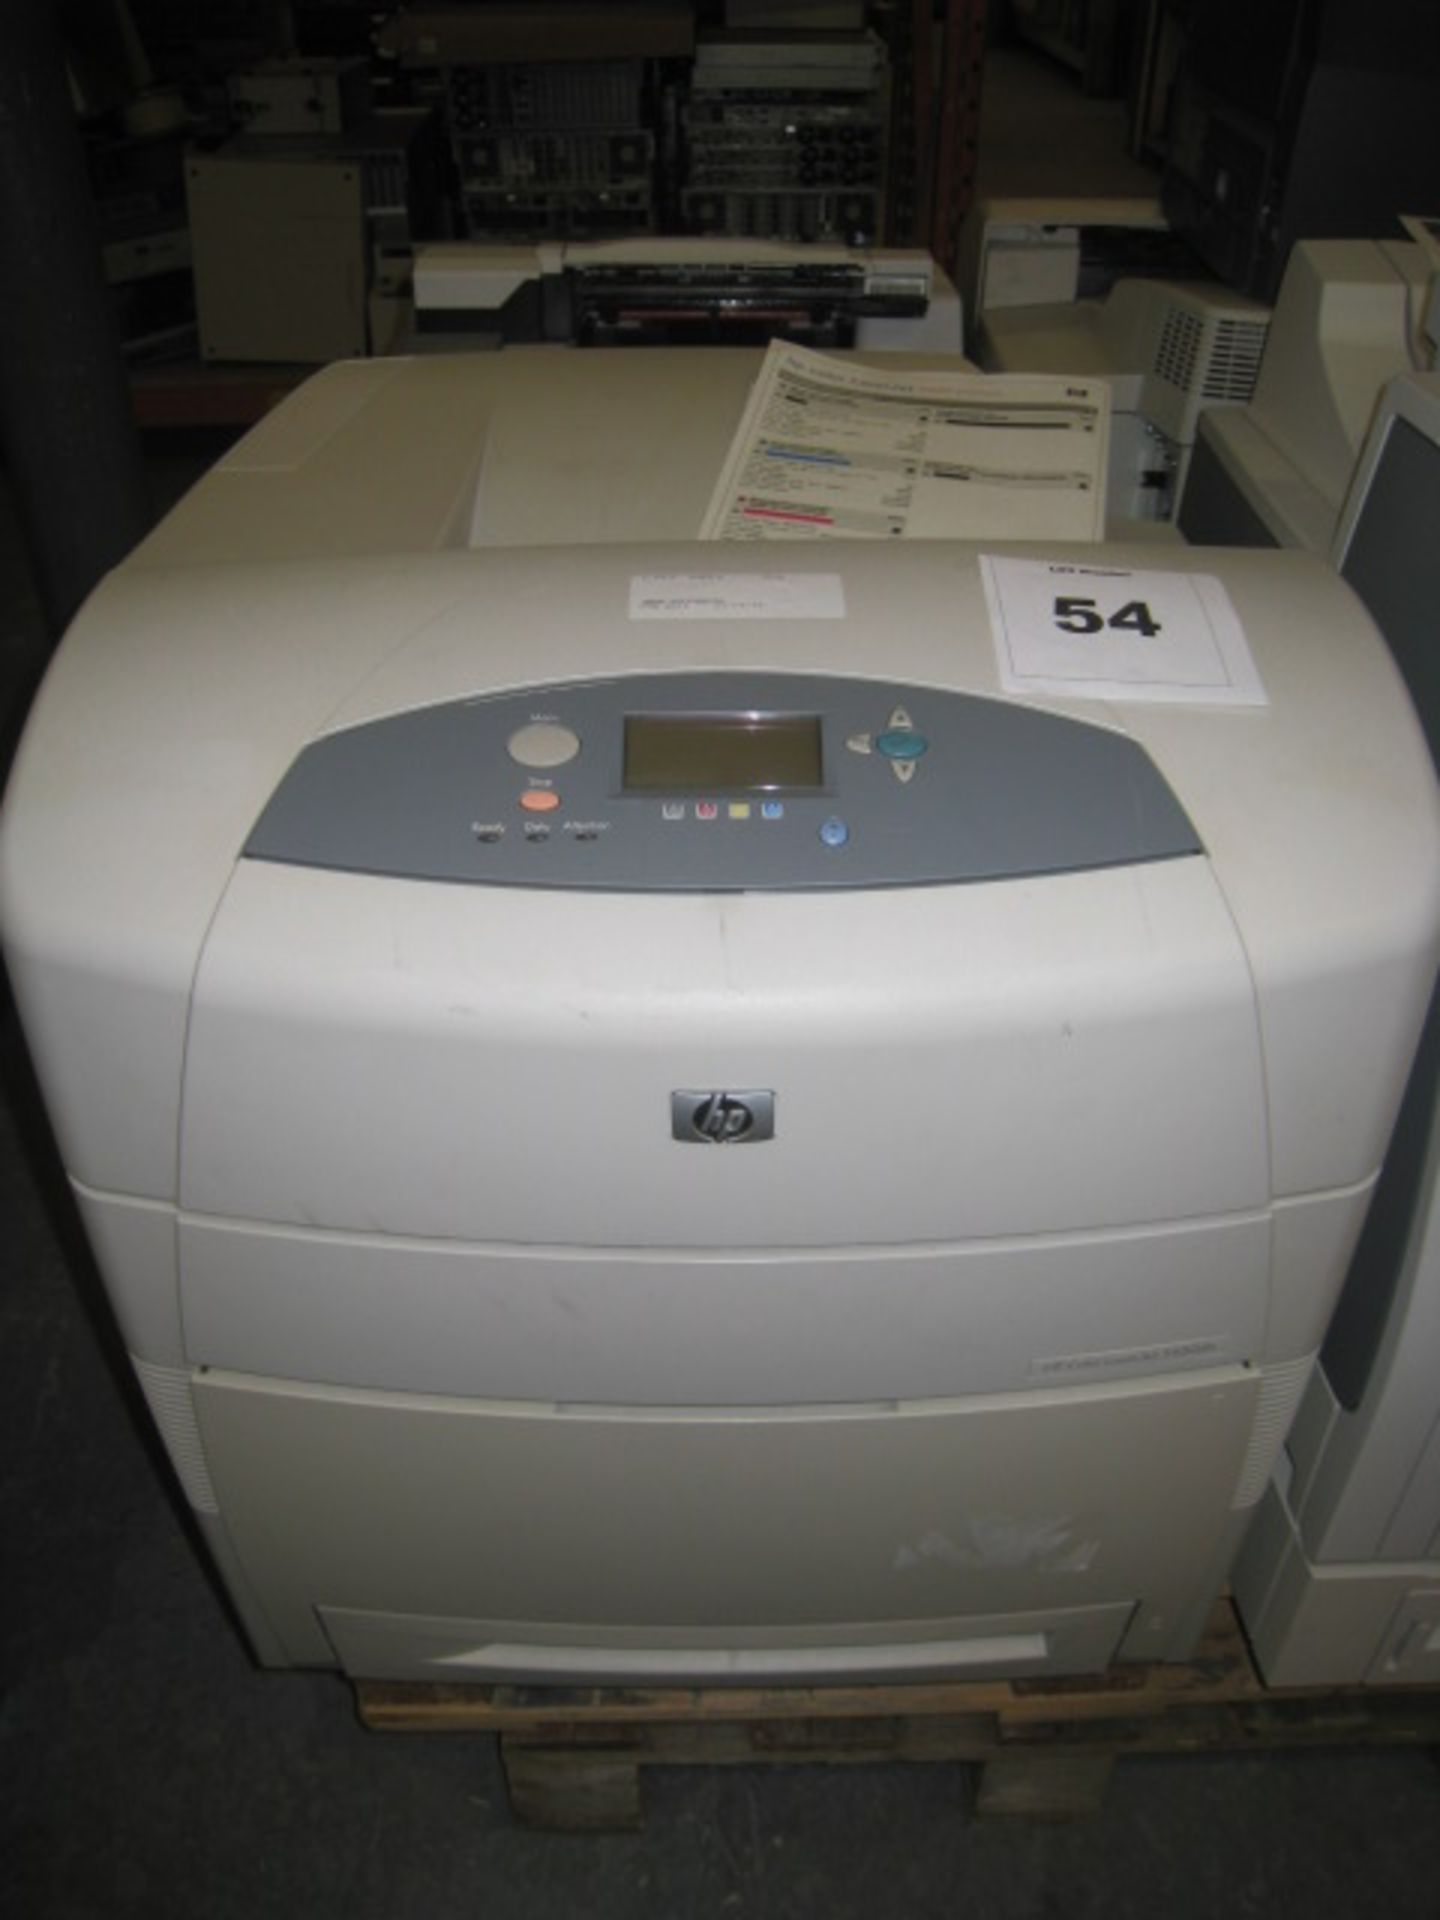 HP Colour Laserjet 5550dn with test print